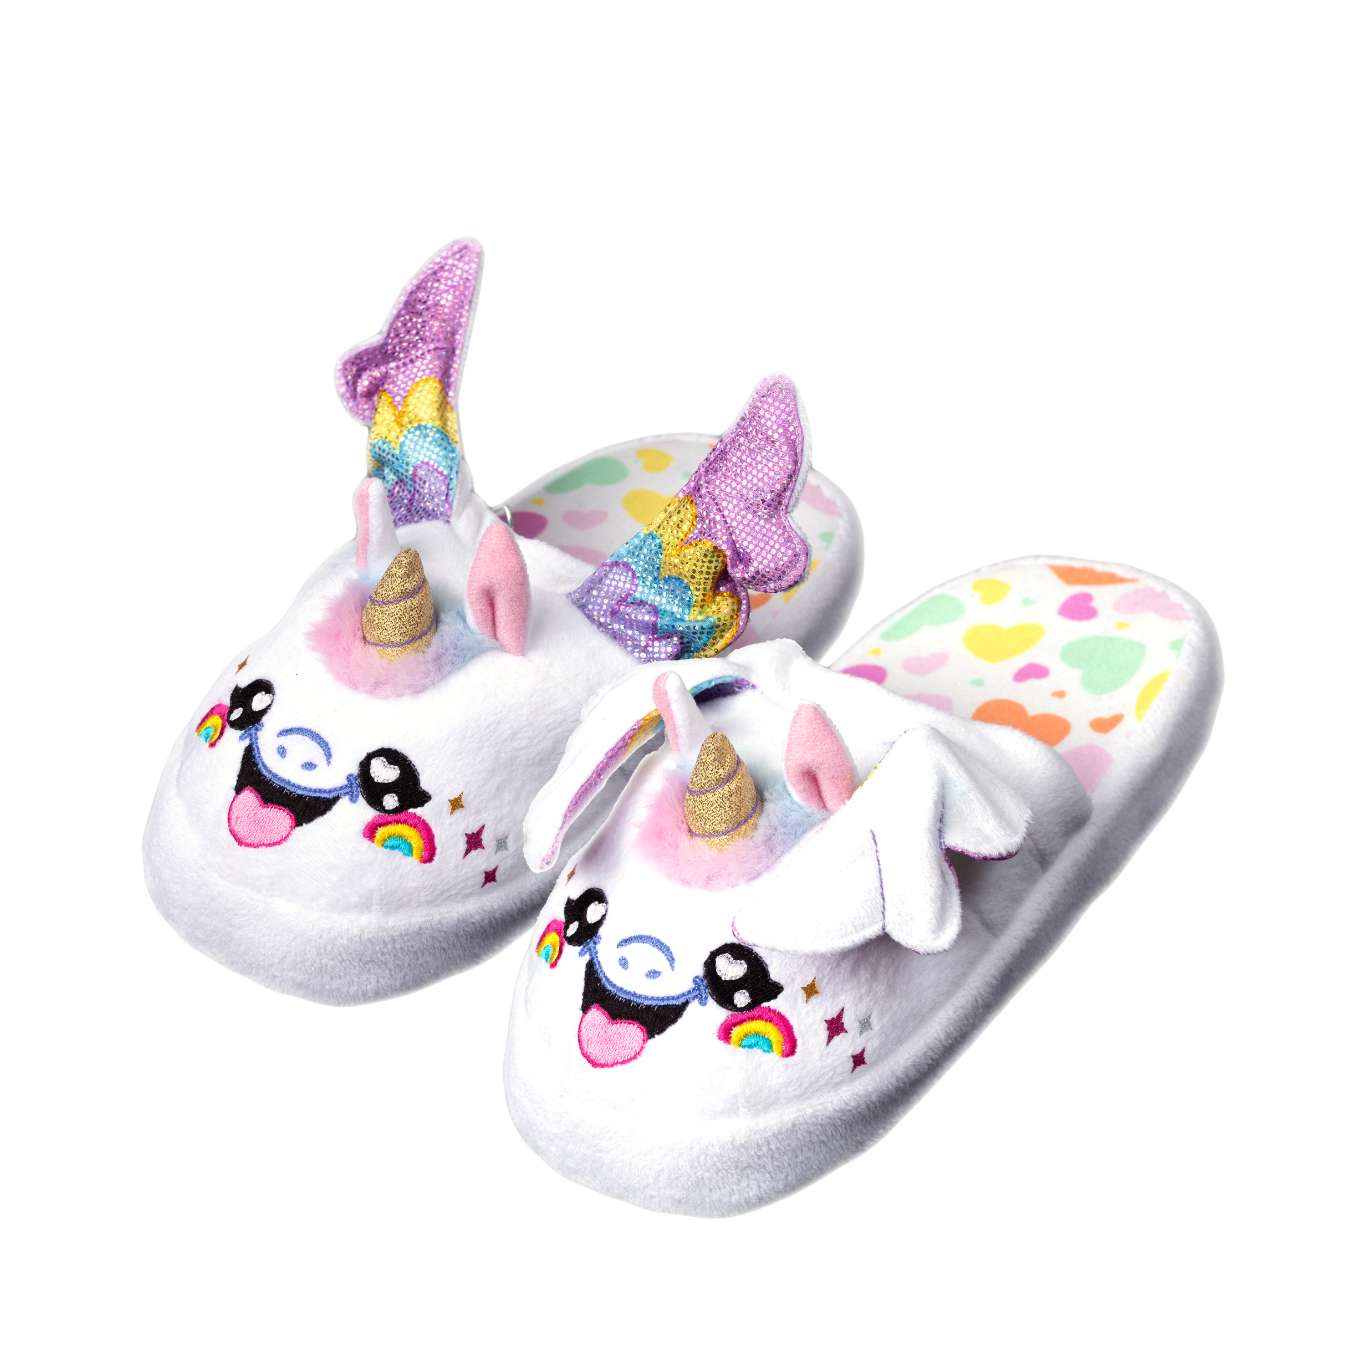 View Stompeez Unicorn Large Fun Animated Kids Slippers Soft And Comfy To Wear Anti Slip Soles High Street TV information